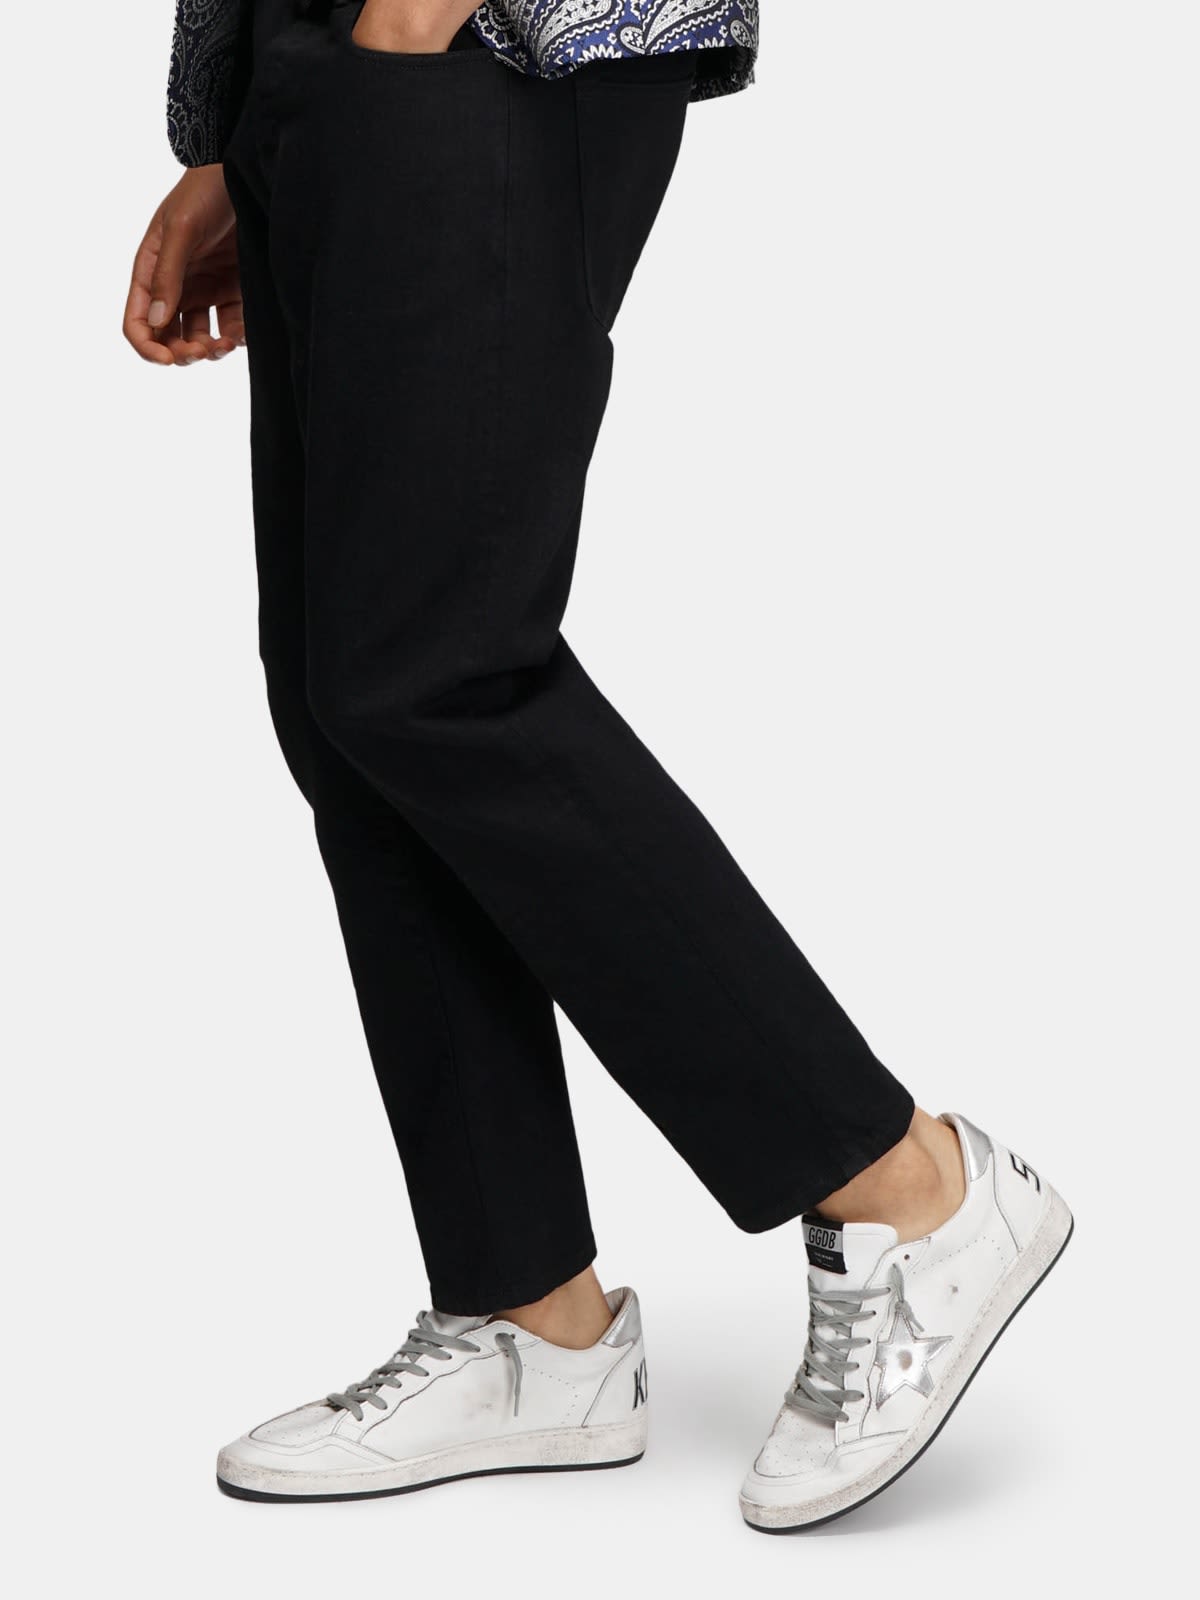 Black Milano tailored trousers